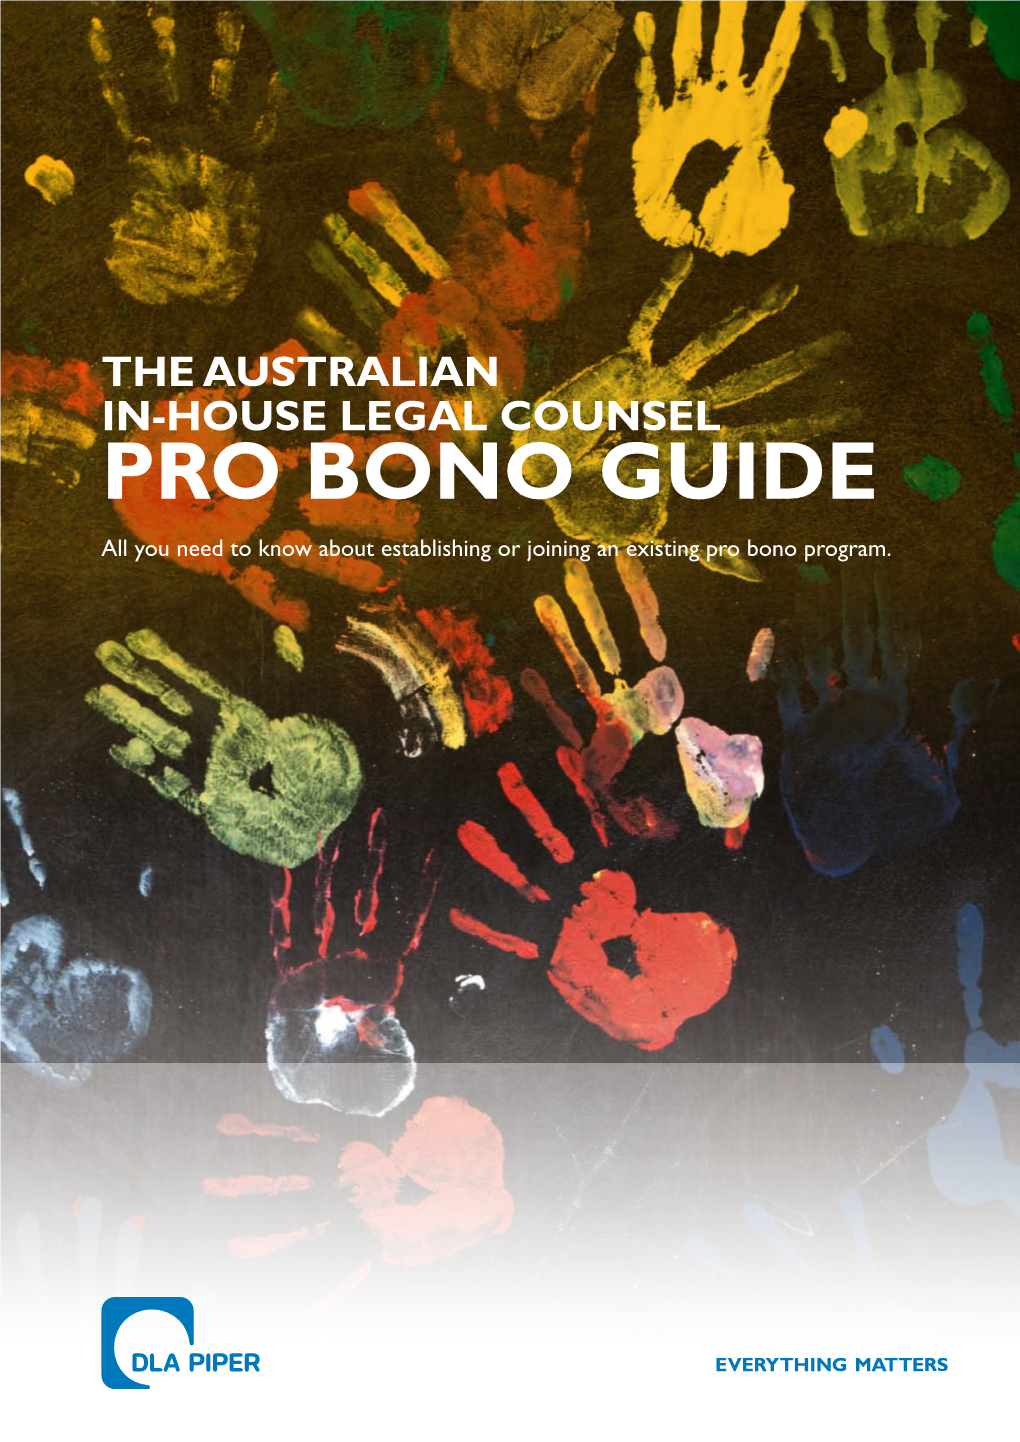 THE AUSTRALIAN IN-HOUSE LEGAL COUNSEL PRO BONO GUIDE All You Need to Know About Establishing Or Joining an Existing Pro Bono Program